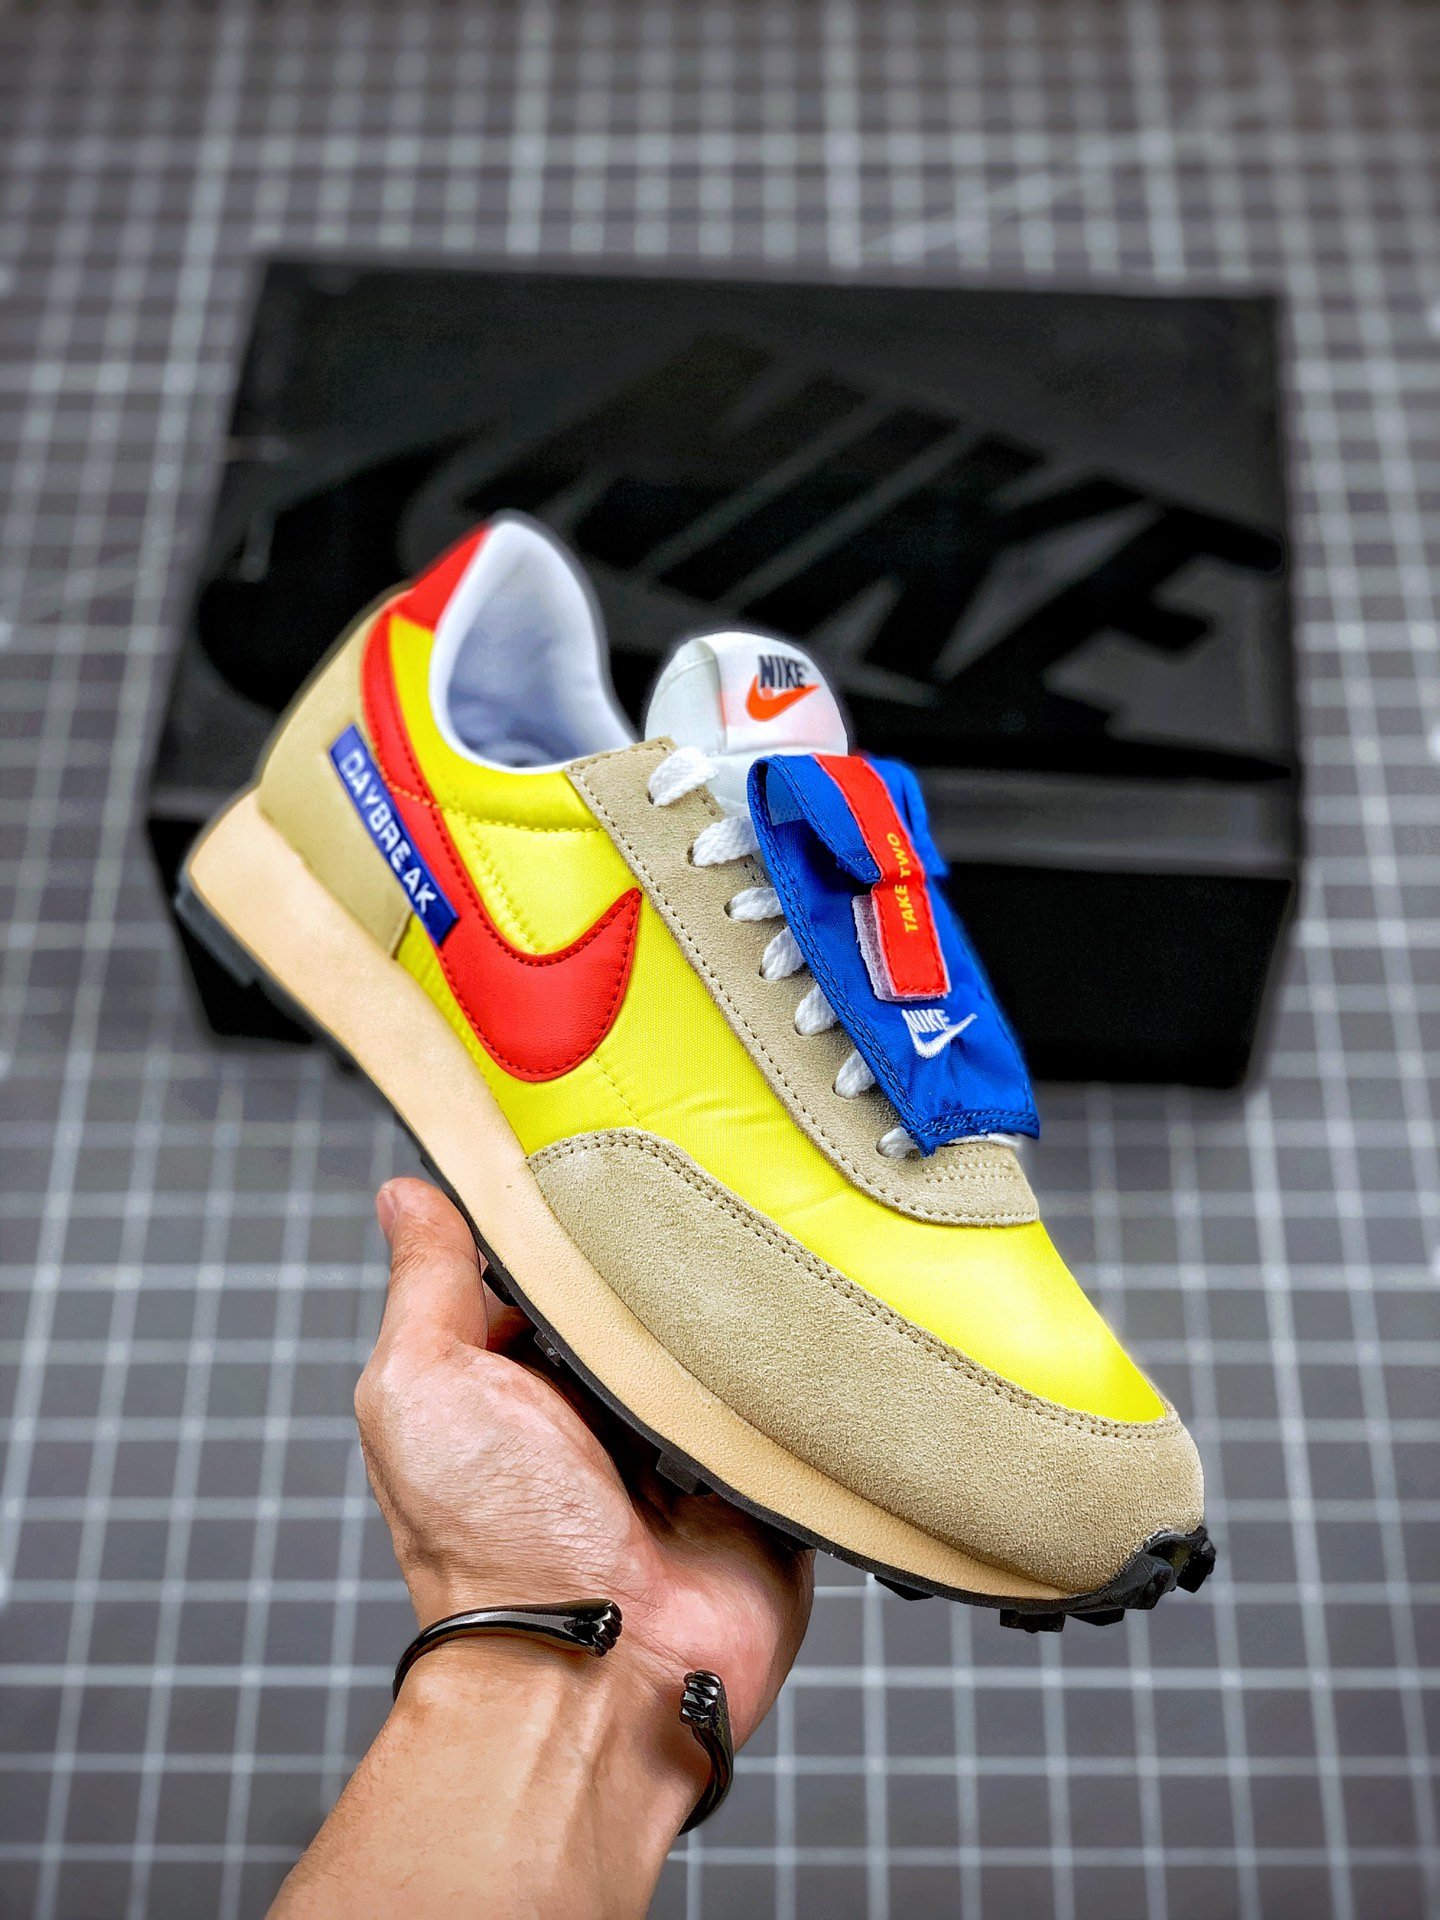 Nike Daybreak SP Speed Yellow/Habanero Red-Team Gold Shoes